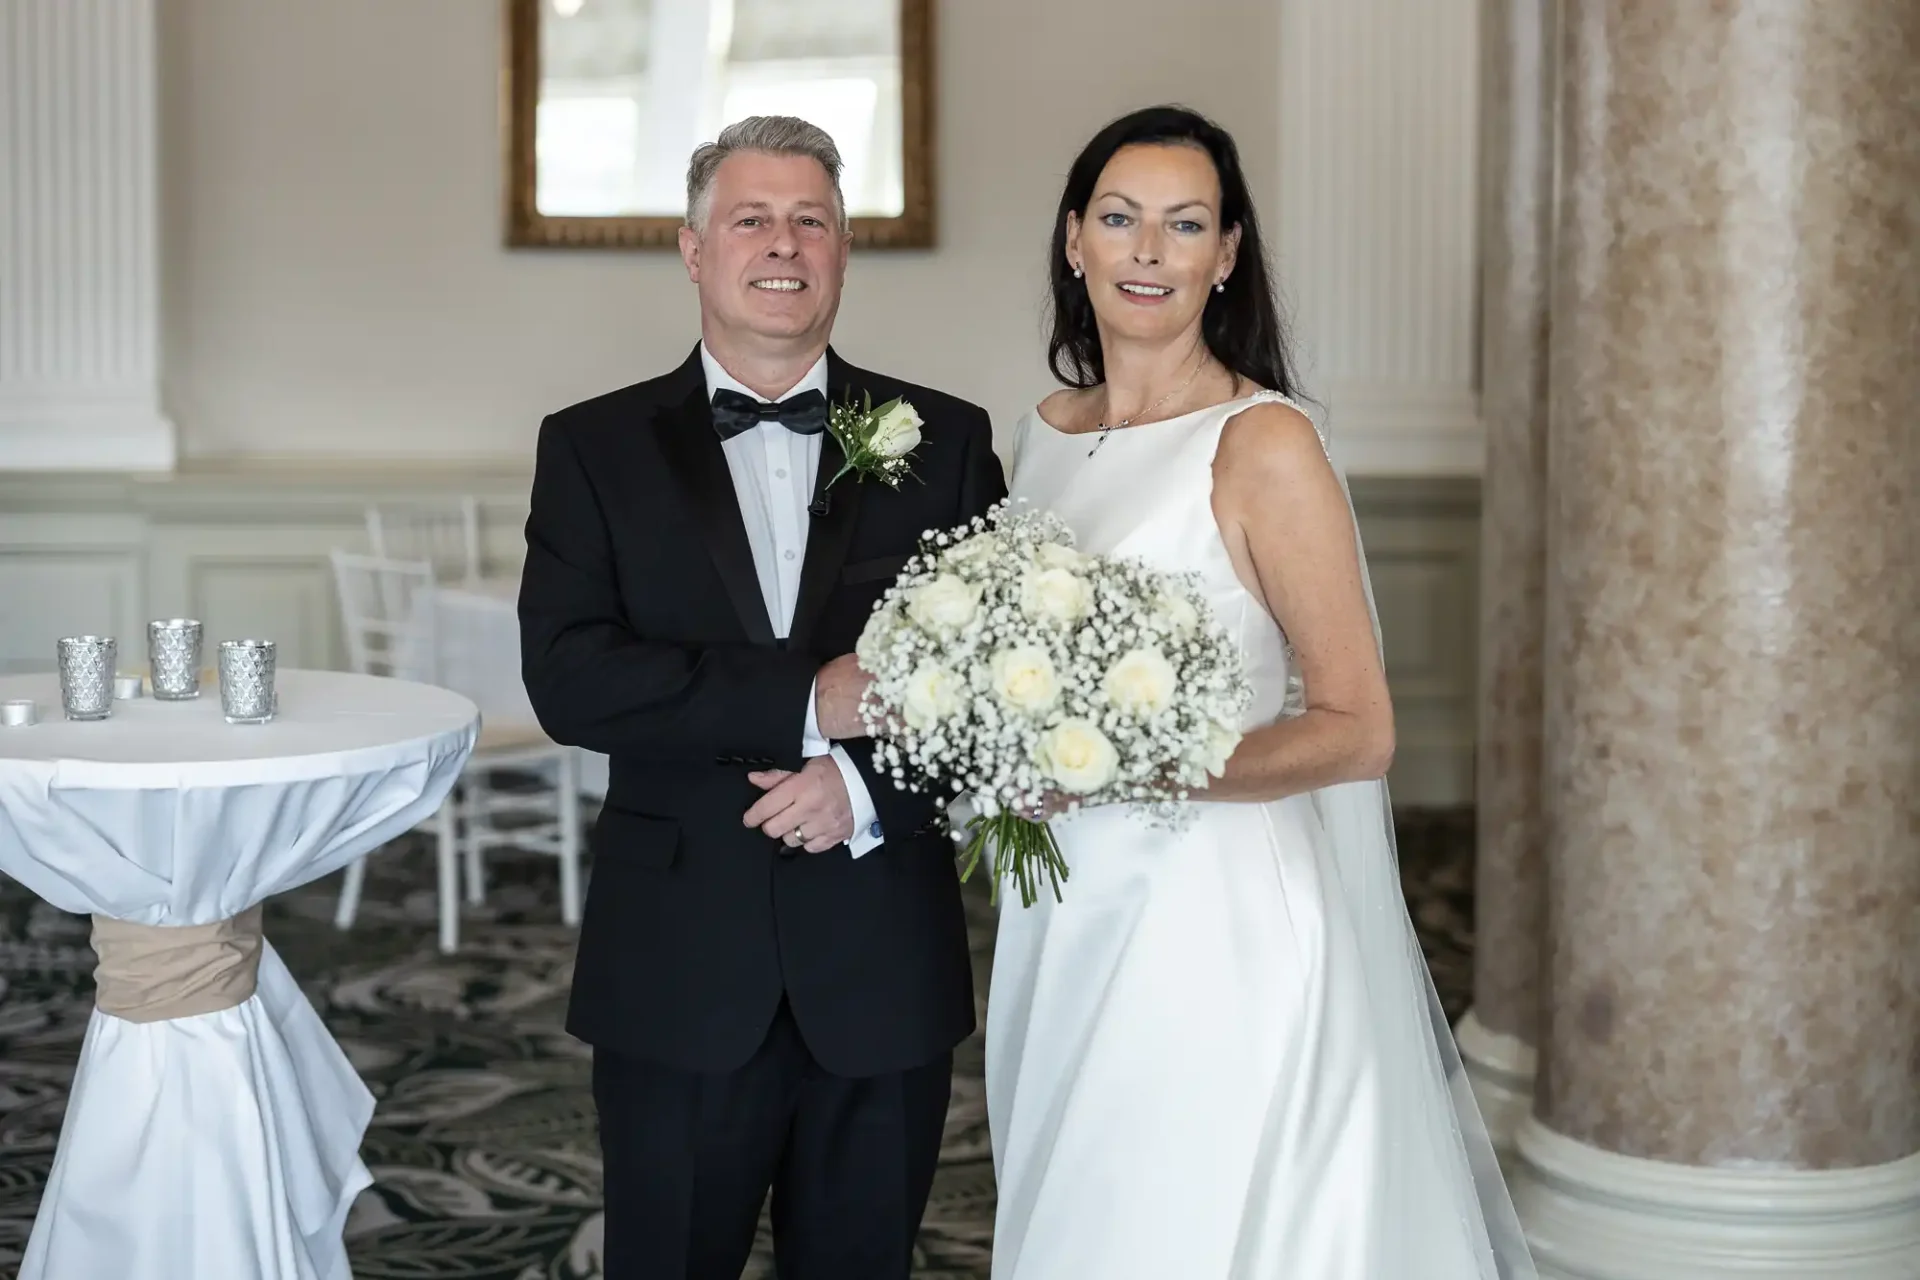 A bride and groom posing in a wedding venue, the bride holding a bouquet of white flowers, both smiling.